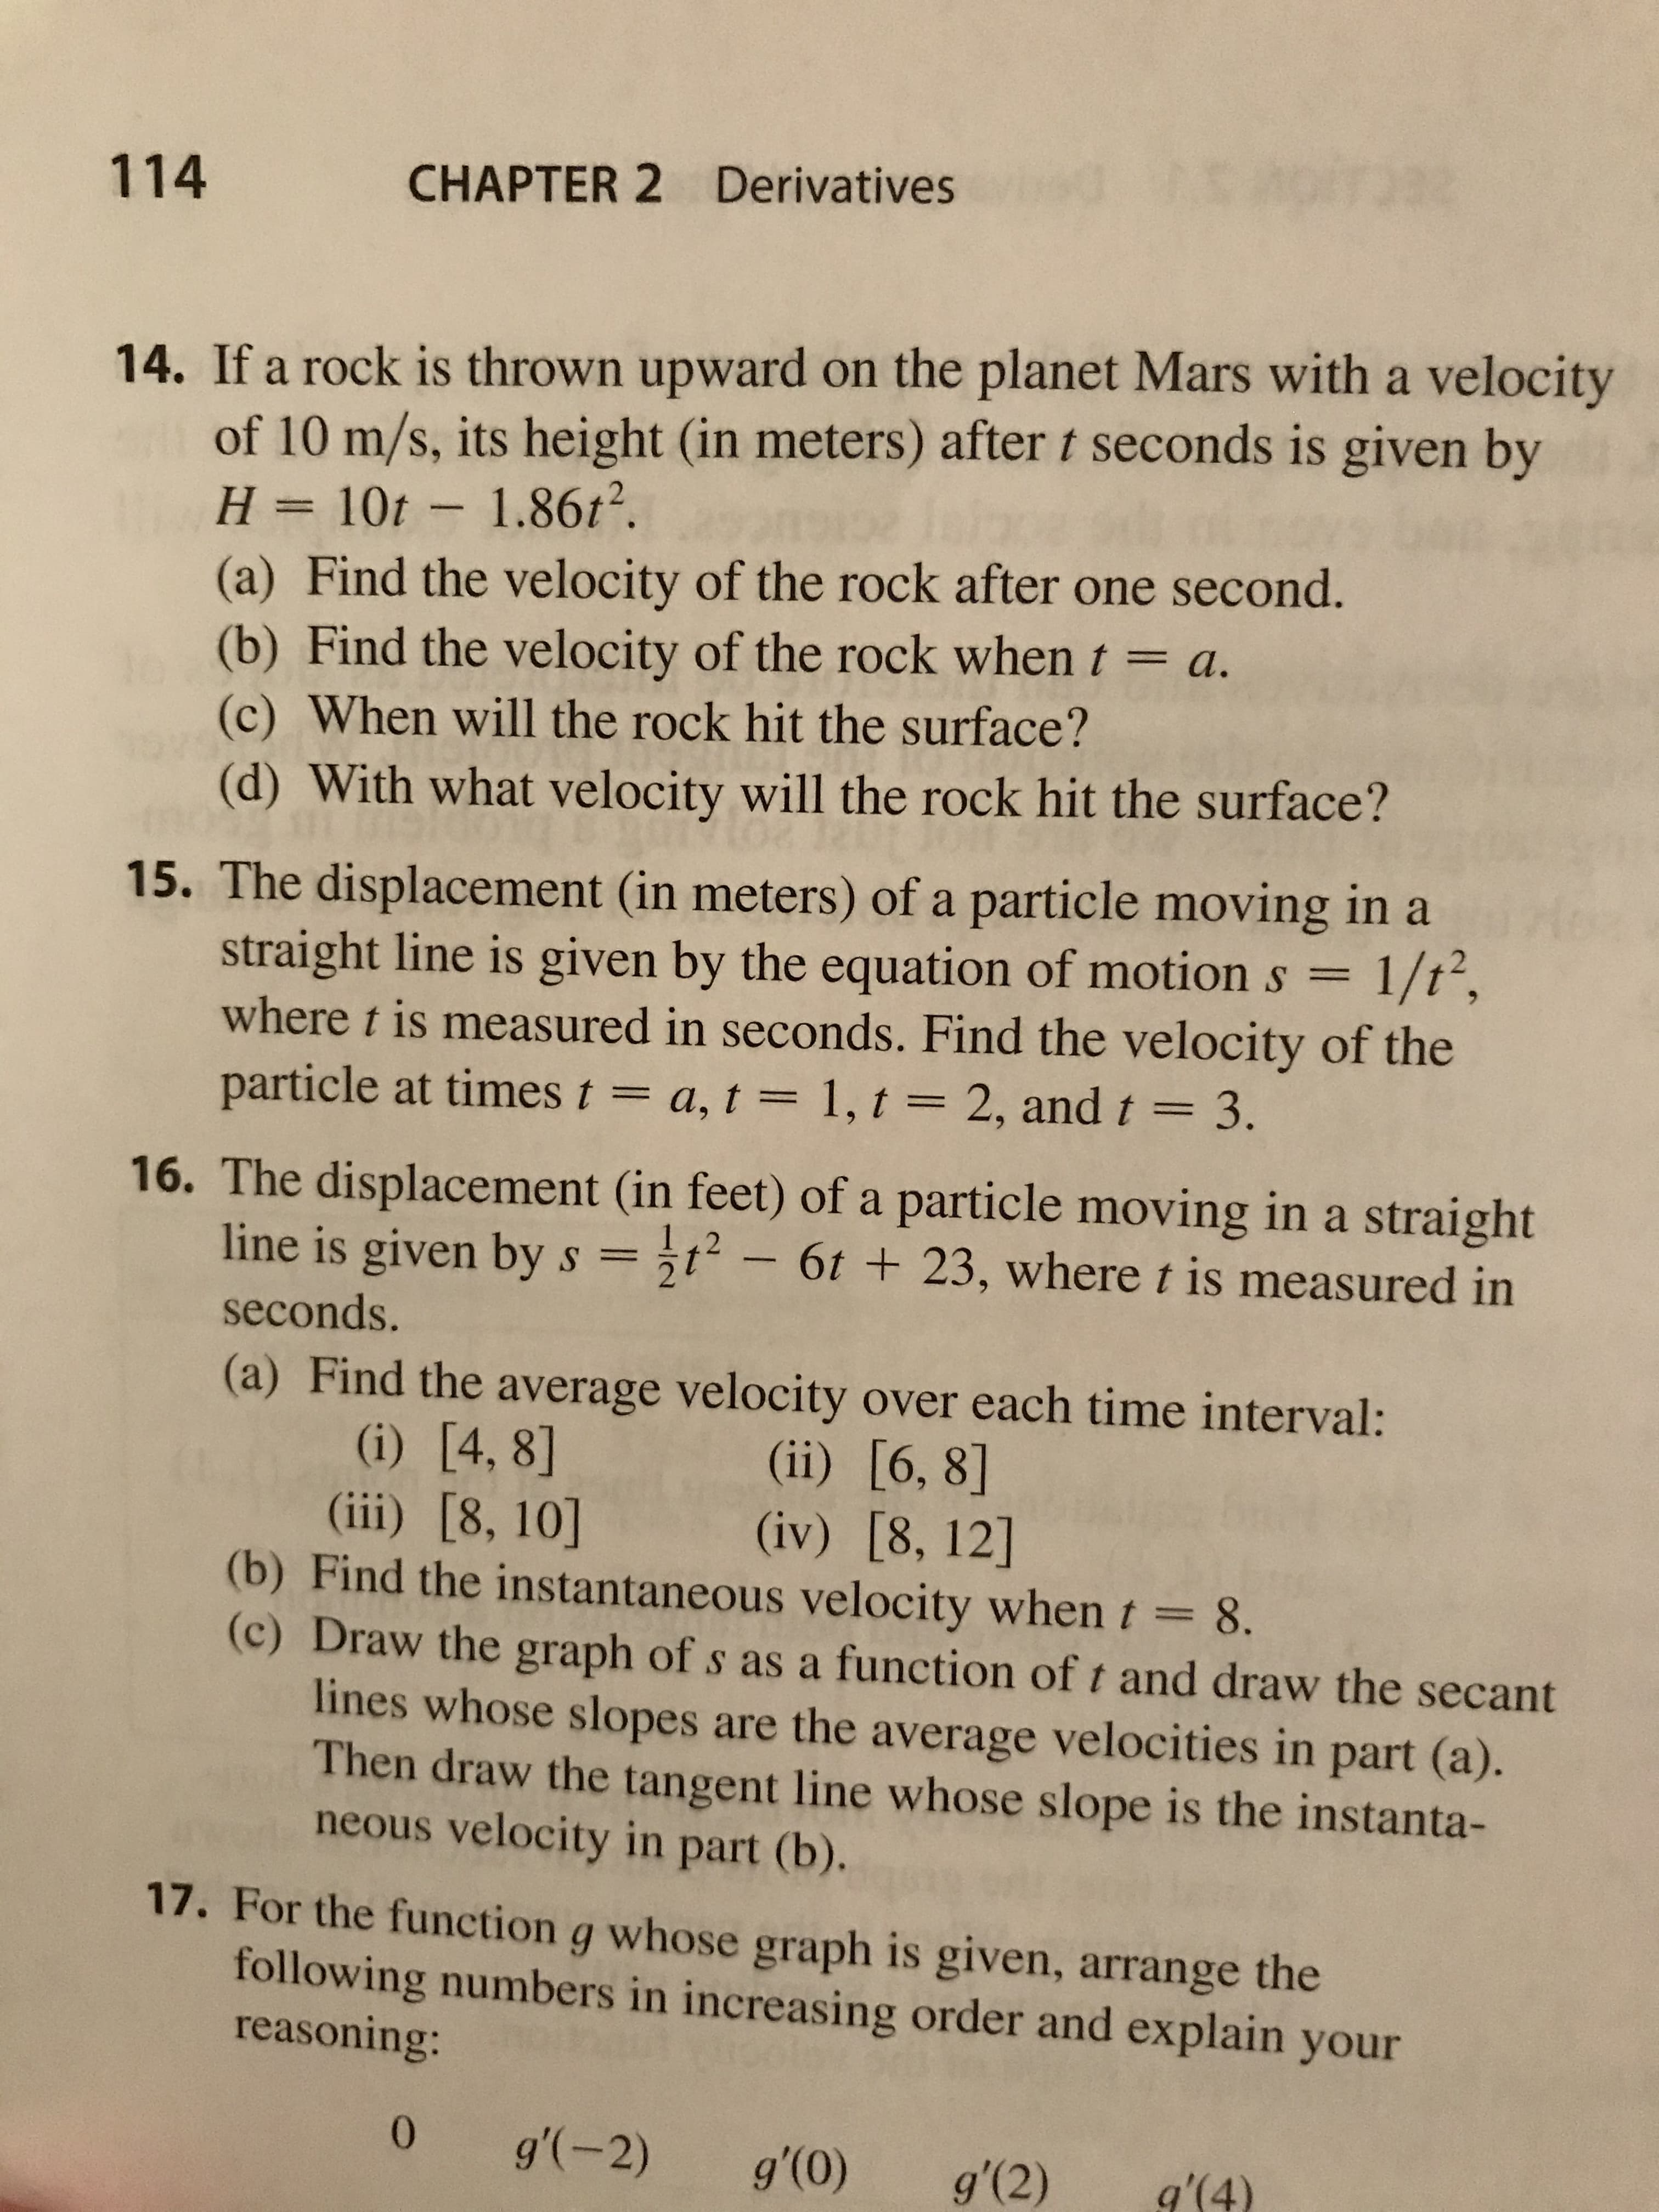 CHAPTER 2 Derivatives
114
14. If a rock is thrown upward on the planet Mars with a velocity
of 10 m/s, its height (in meters) after t seconds is given by
H = 10t - 1.86t2.
(a) Find the velocity of the rock after one second.
(b) Find the velocity of the rock when t = a.
(c) When will the rock hit the surface?
%3D
(d) With what velocity will the rock hit the surface?
15. The displacement (in meters) of a particle moving in a
straight line is given by the equation of motion s =
where t is measured in seconds. Find the velocity of the
particle at times t = a, t = 1, t = 2, and t = 3.
1/t²,
%3D
16. The displacement (in feet) of a particle moving in a straight
line is given by s =t- 6t + 23, wheret is measured in
seconds.
(a) Find the average velocity over each time interval:
(i) [4, 8]
(iii) [8, 10]
(b) Find the instantaneous velocity whent=8.
(c) Draw the graph of s as a function of t and draw the secant
lines whose slopes are the average velocities in part (a).
Then draw the tangent line whose slope is the instanta-
neous velocity in part (b).
(ii) [6, 8]
(iv) [8, 12]
%3D
17. For the function g whose graph is given, arrange the
following numbers in increasing order and explain your
reasoning:
0.
g'(-2)
g'(0)
g'(2)
g'(4)
